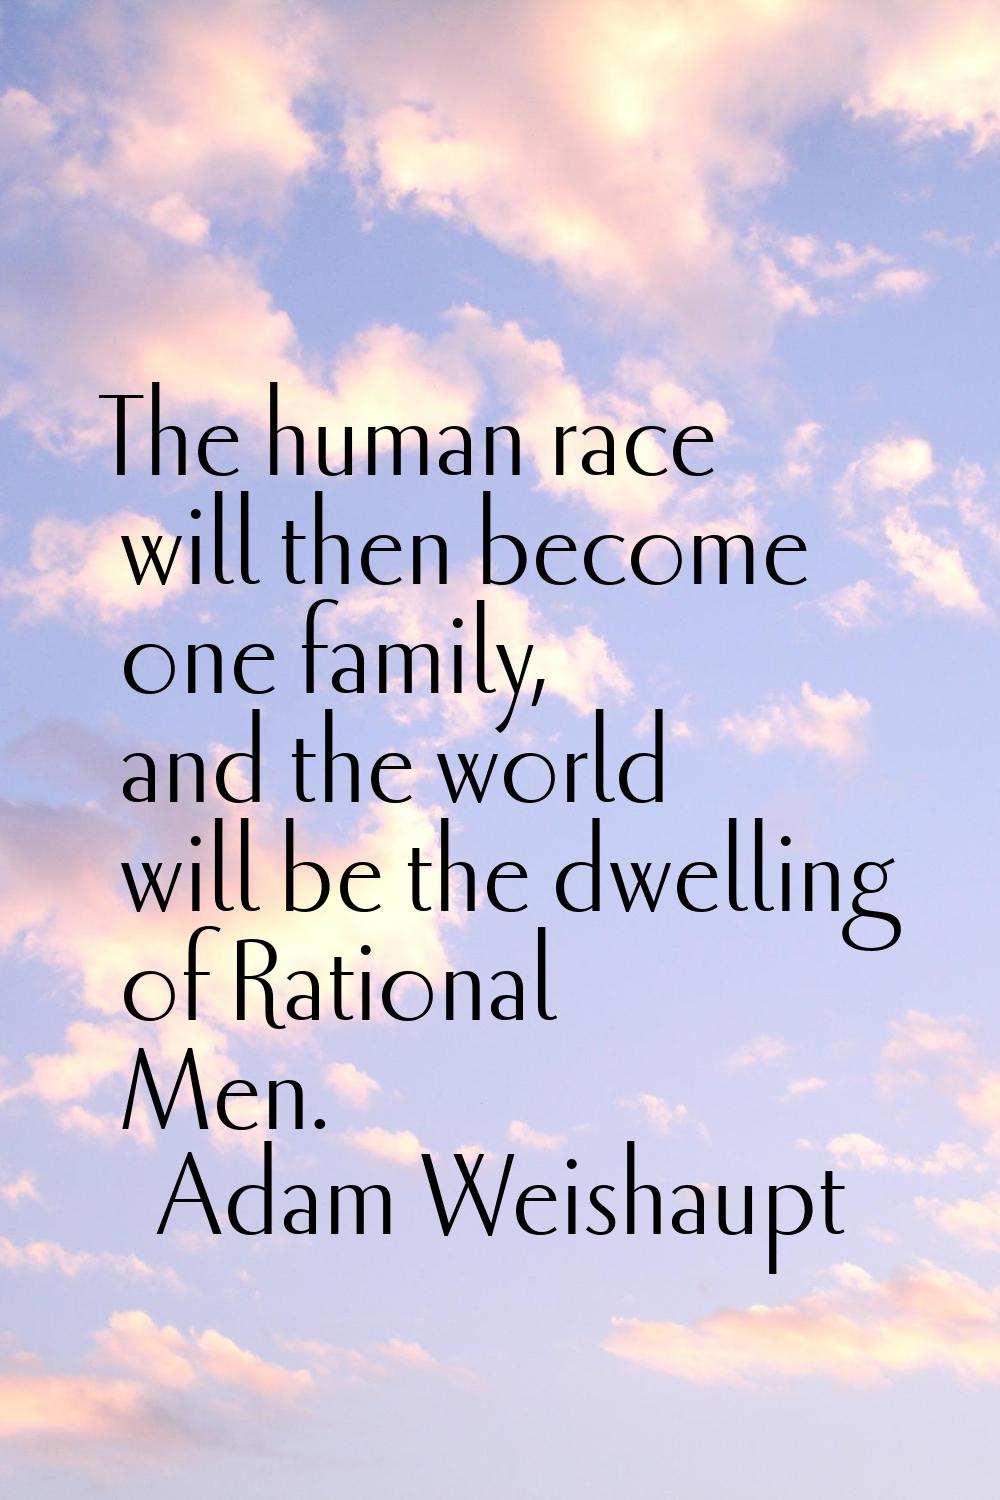 The human race will then become one family, and the world will be the dwelling of Rational Men.